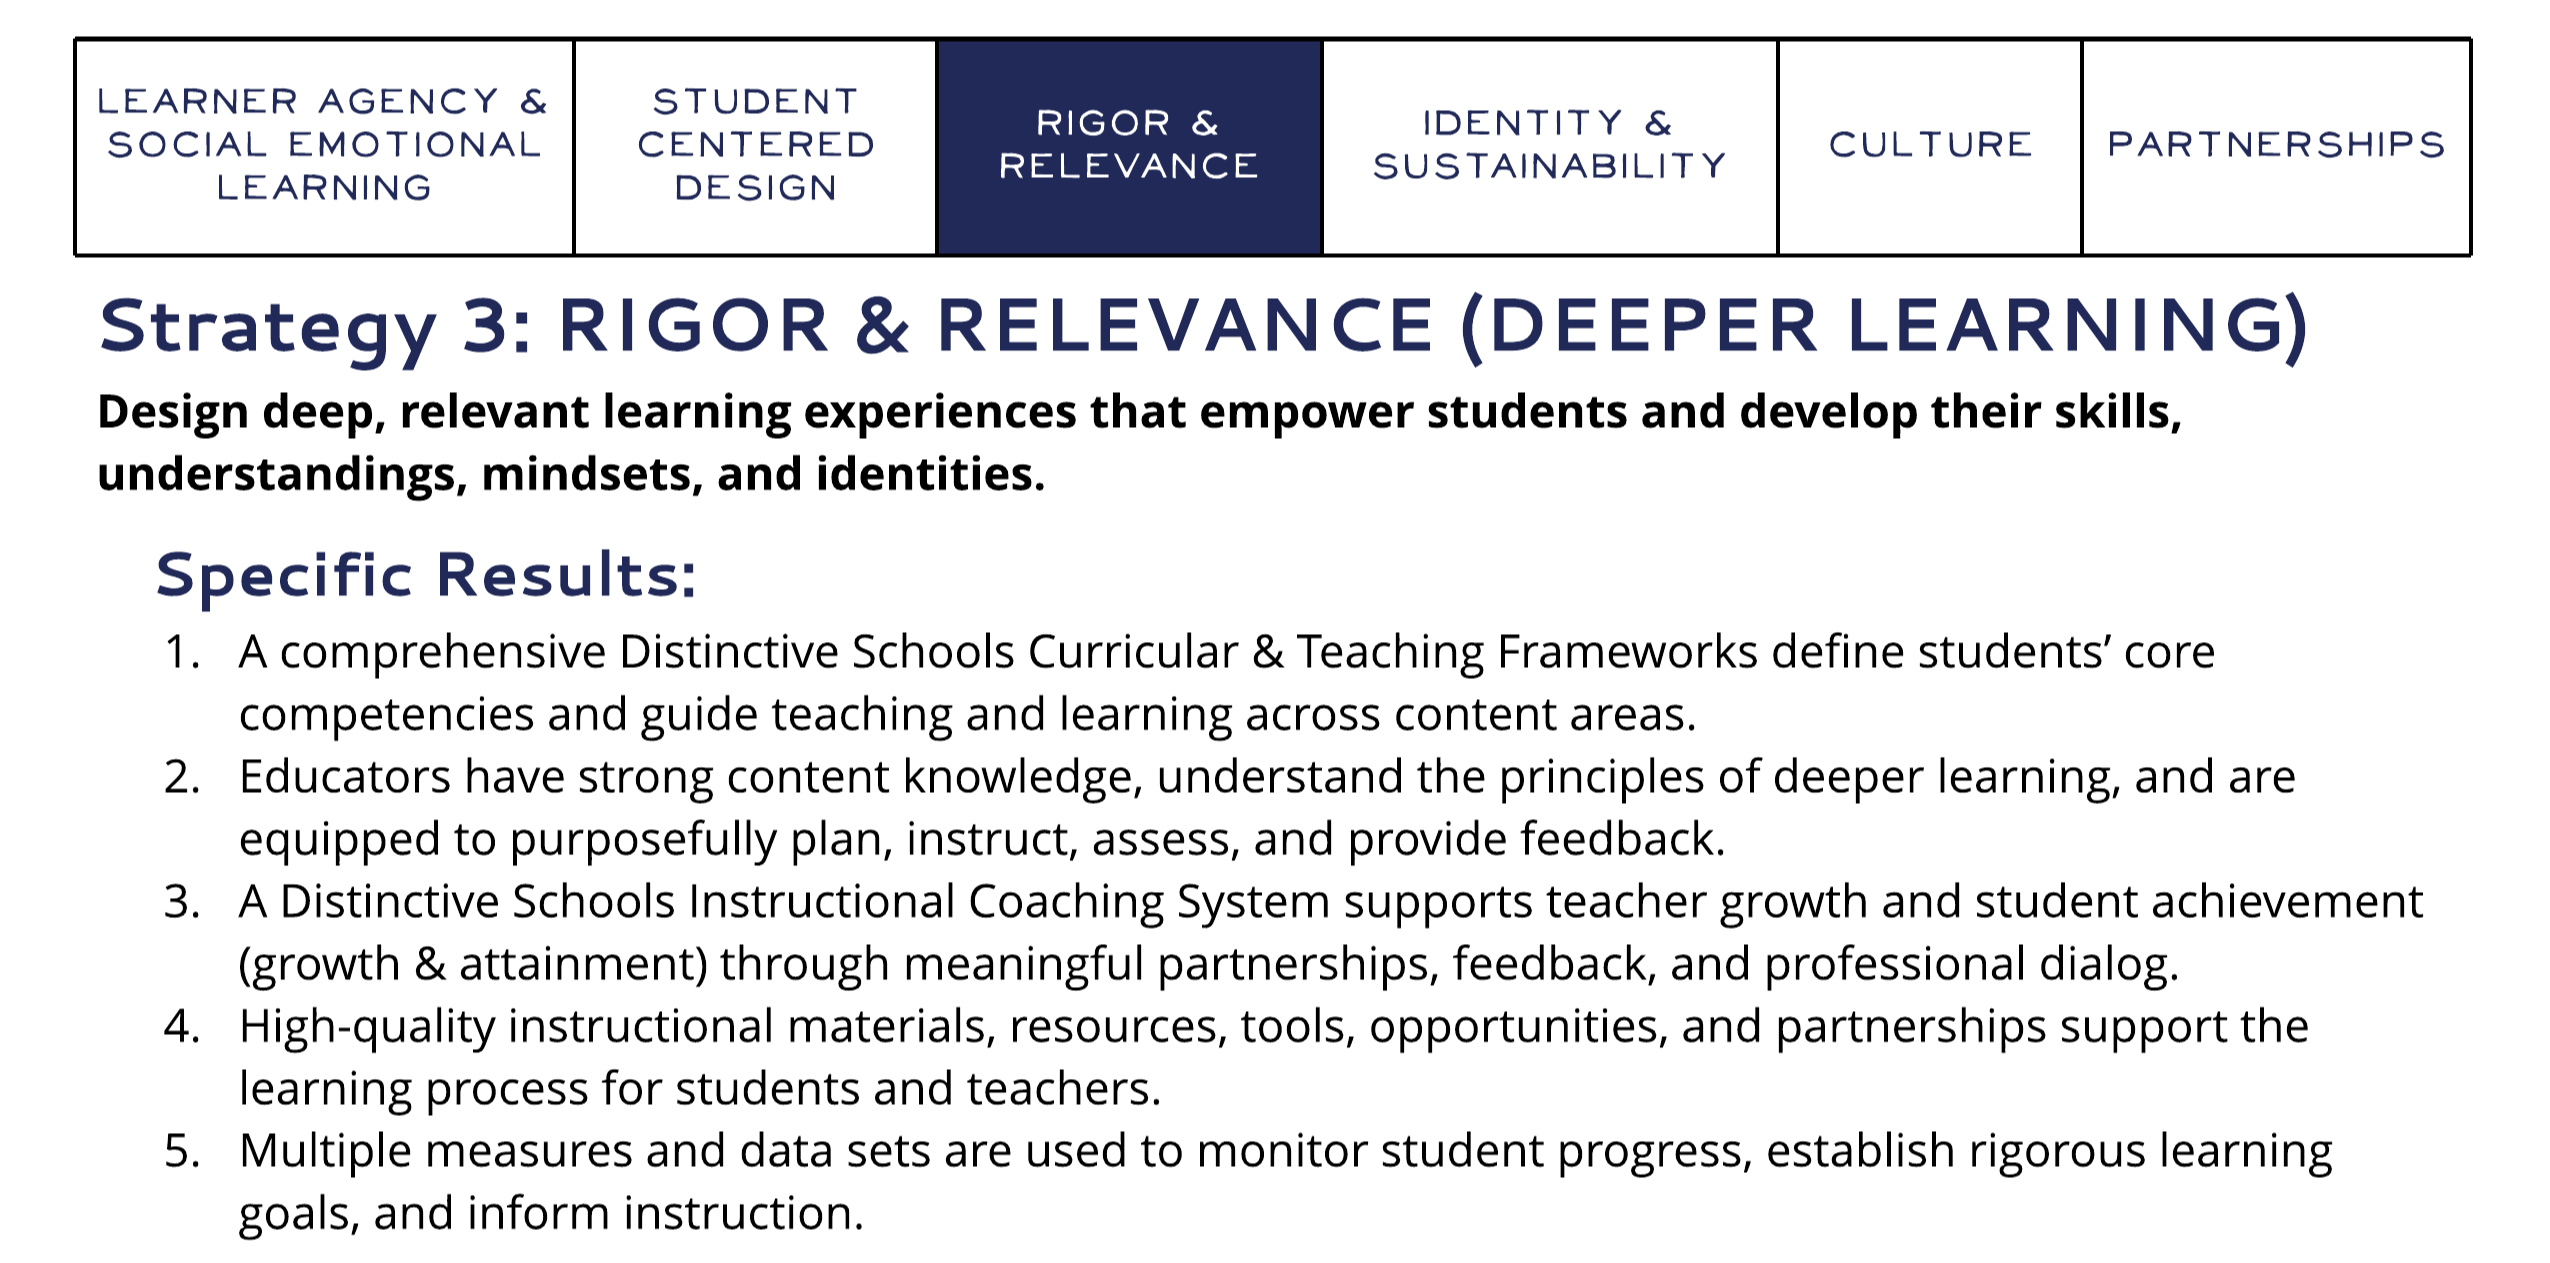 Strategy 3: Rigor & Relevance (Deeper Learning) – download here: https://5il.co/wsbg